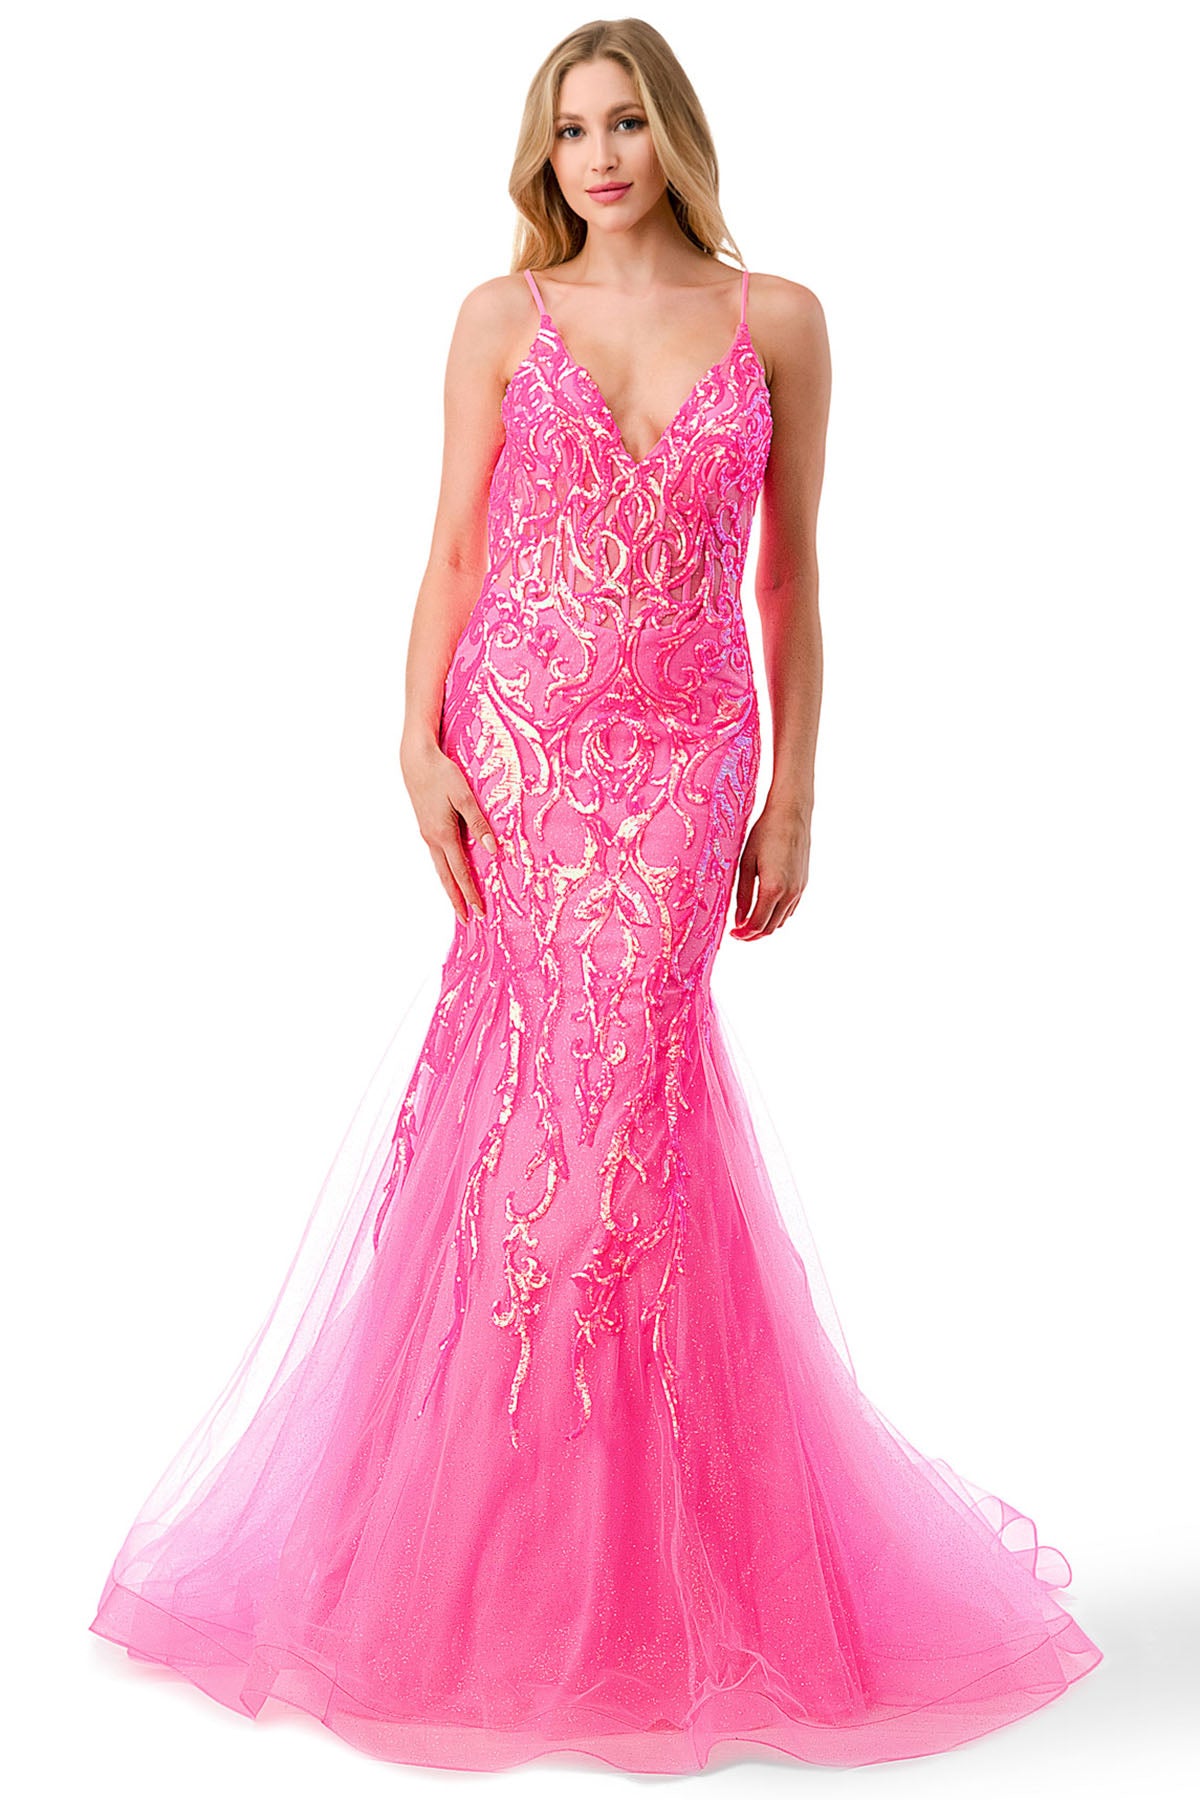 How To Accessorize A Pink Prom Dress